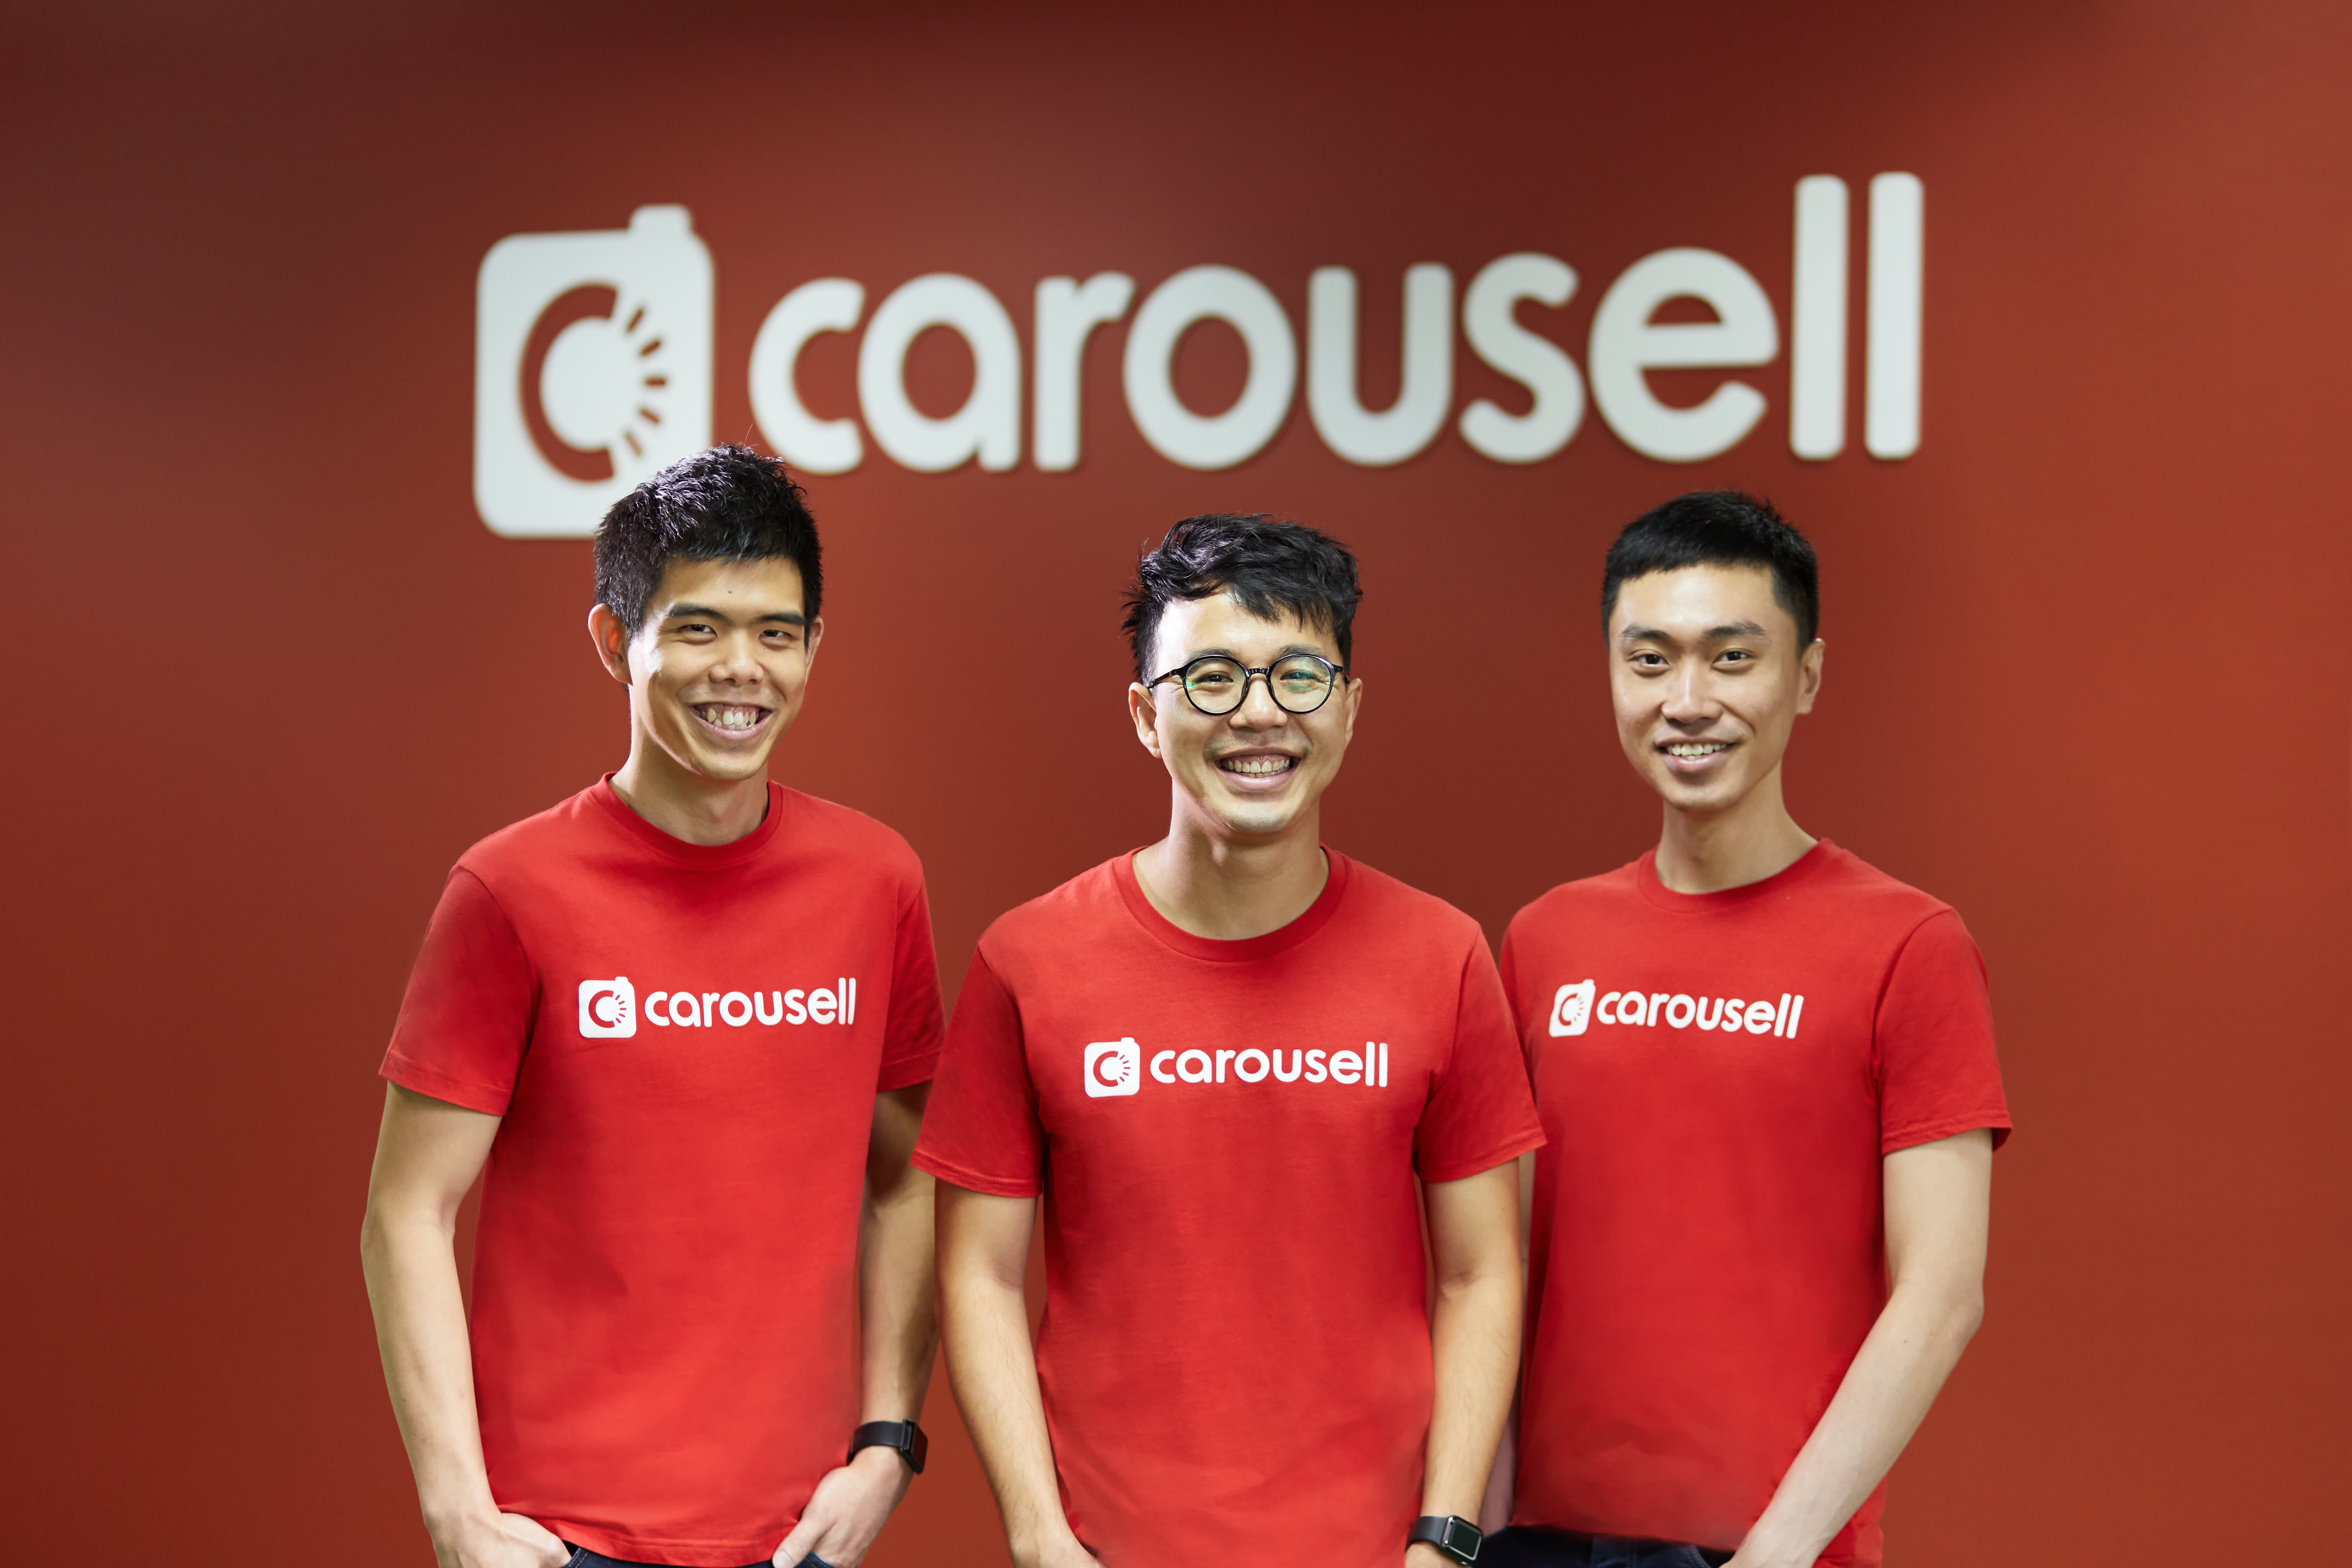 Southeast Asia's Carousell is considering all growth options including IPO, CEO says